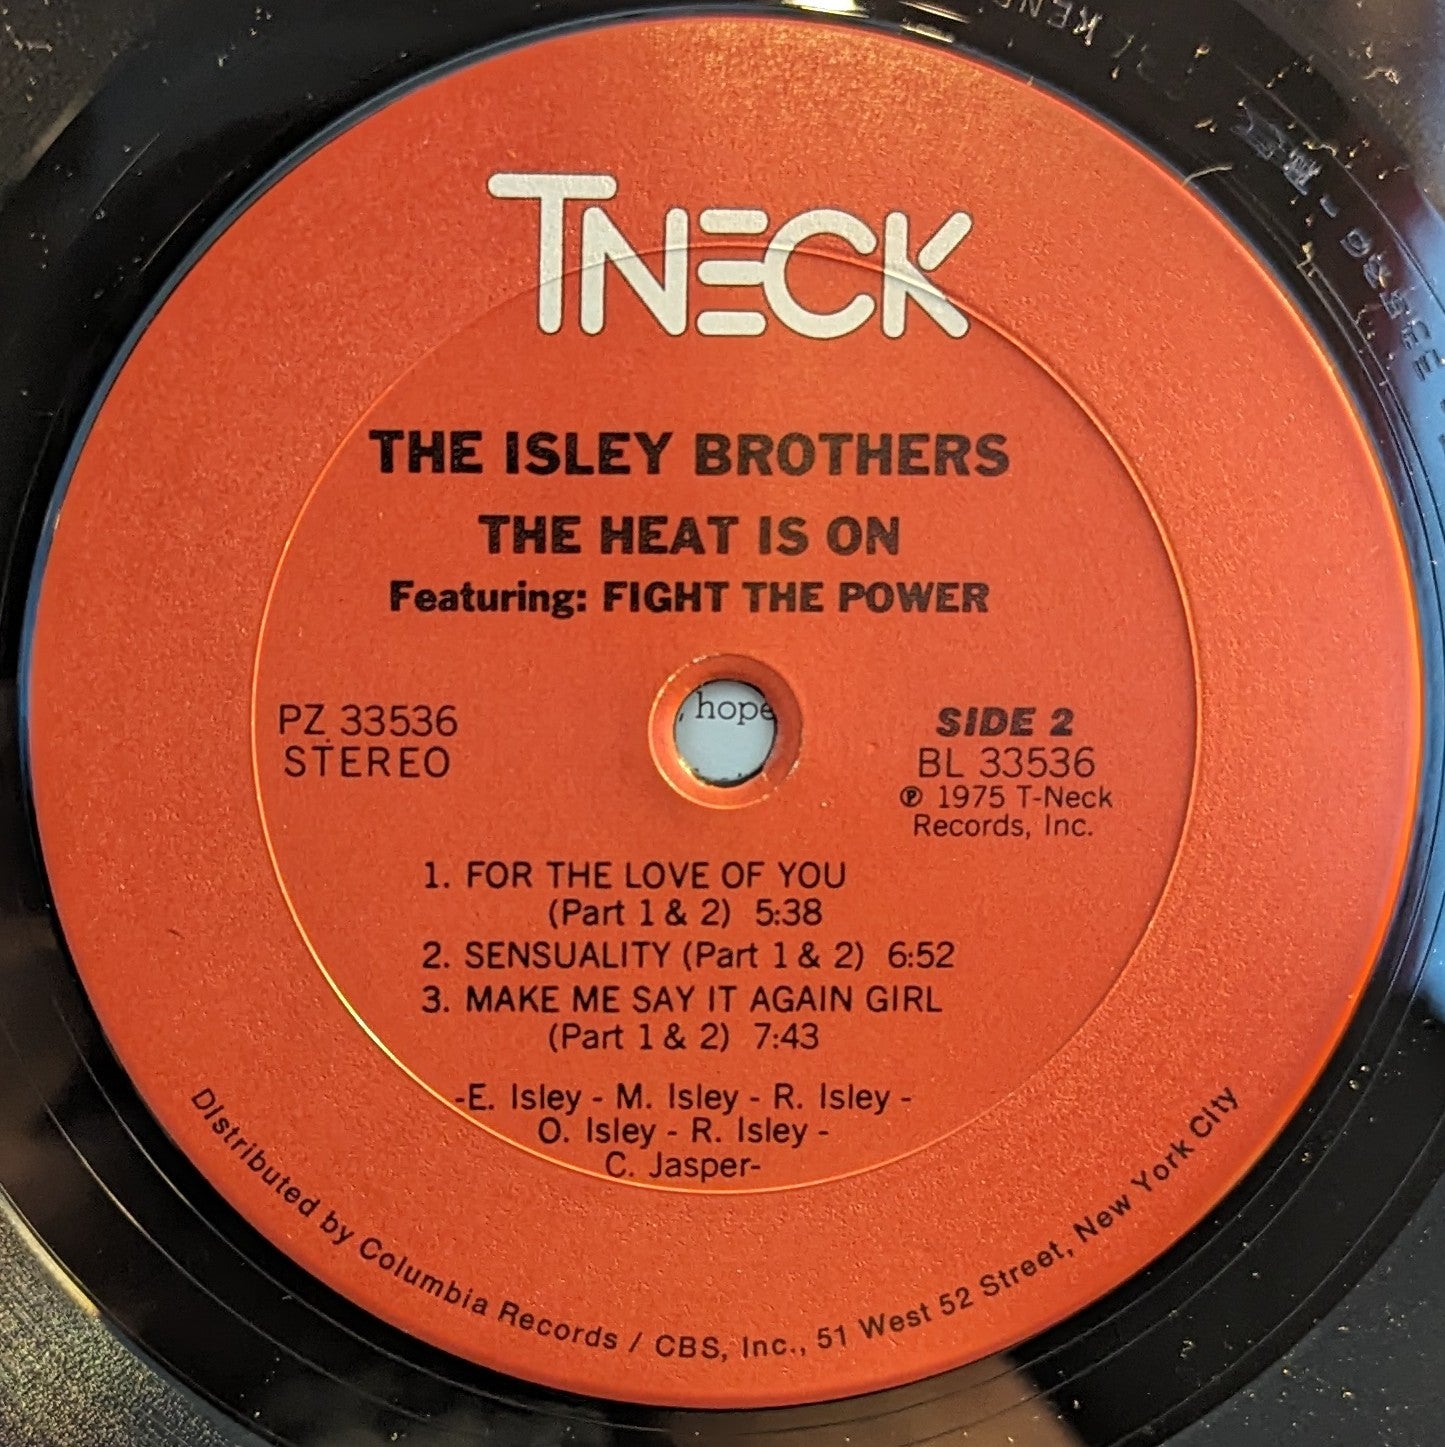 The Isley Brothers The Heat Is On *PITMAN* LP Near Mint (NM or M-) Excellent (EX)